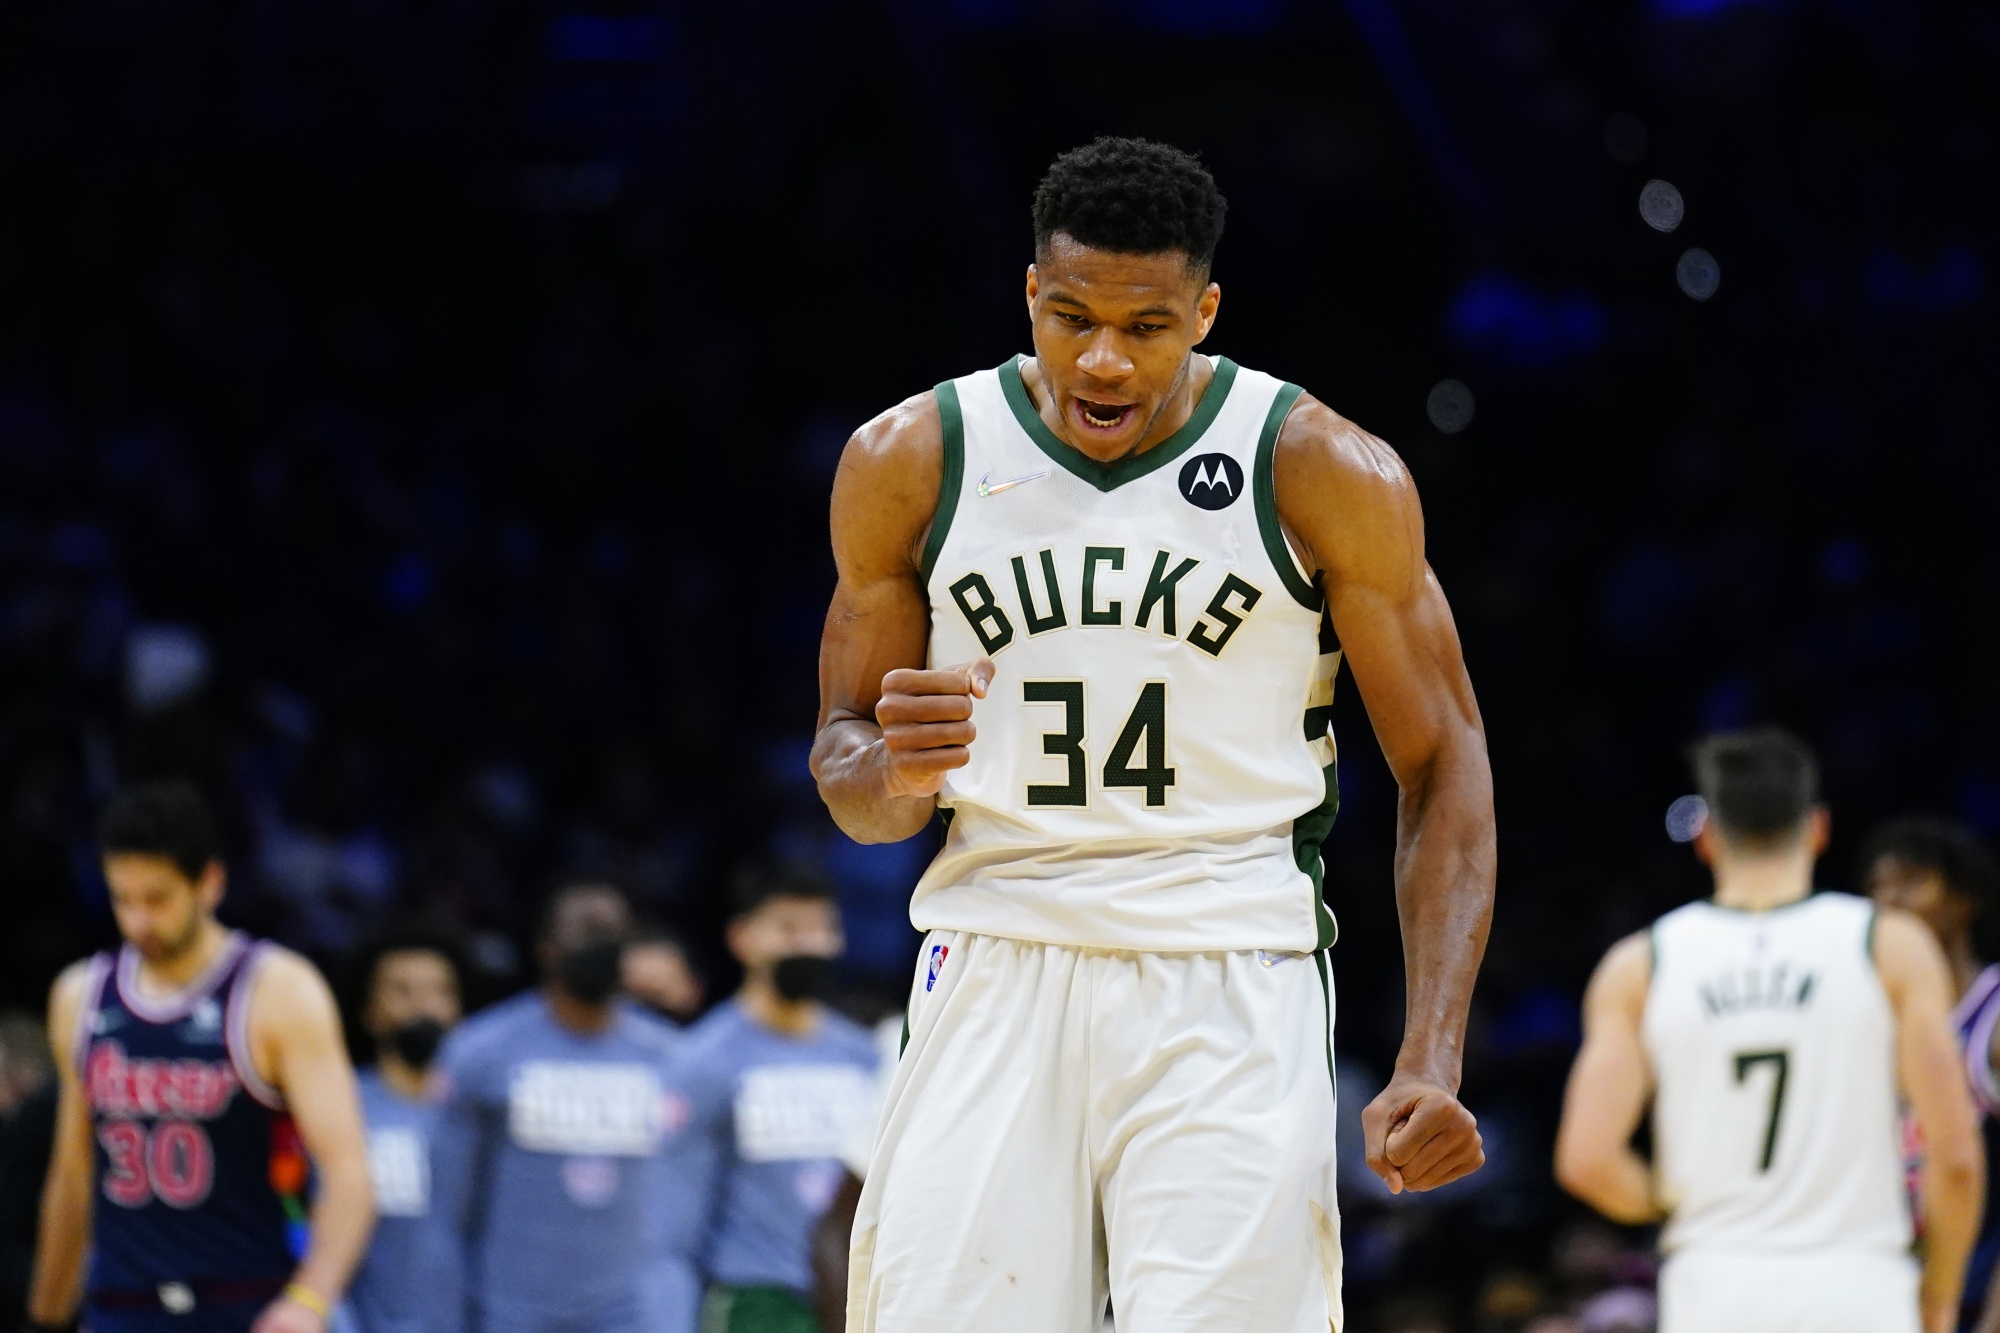 2017 NBA All-Star game: Giannis Antetokounmpo opens up on his rise